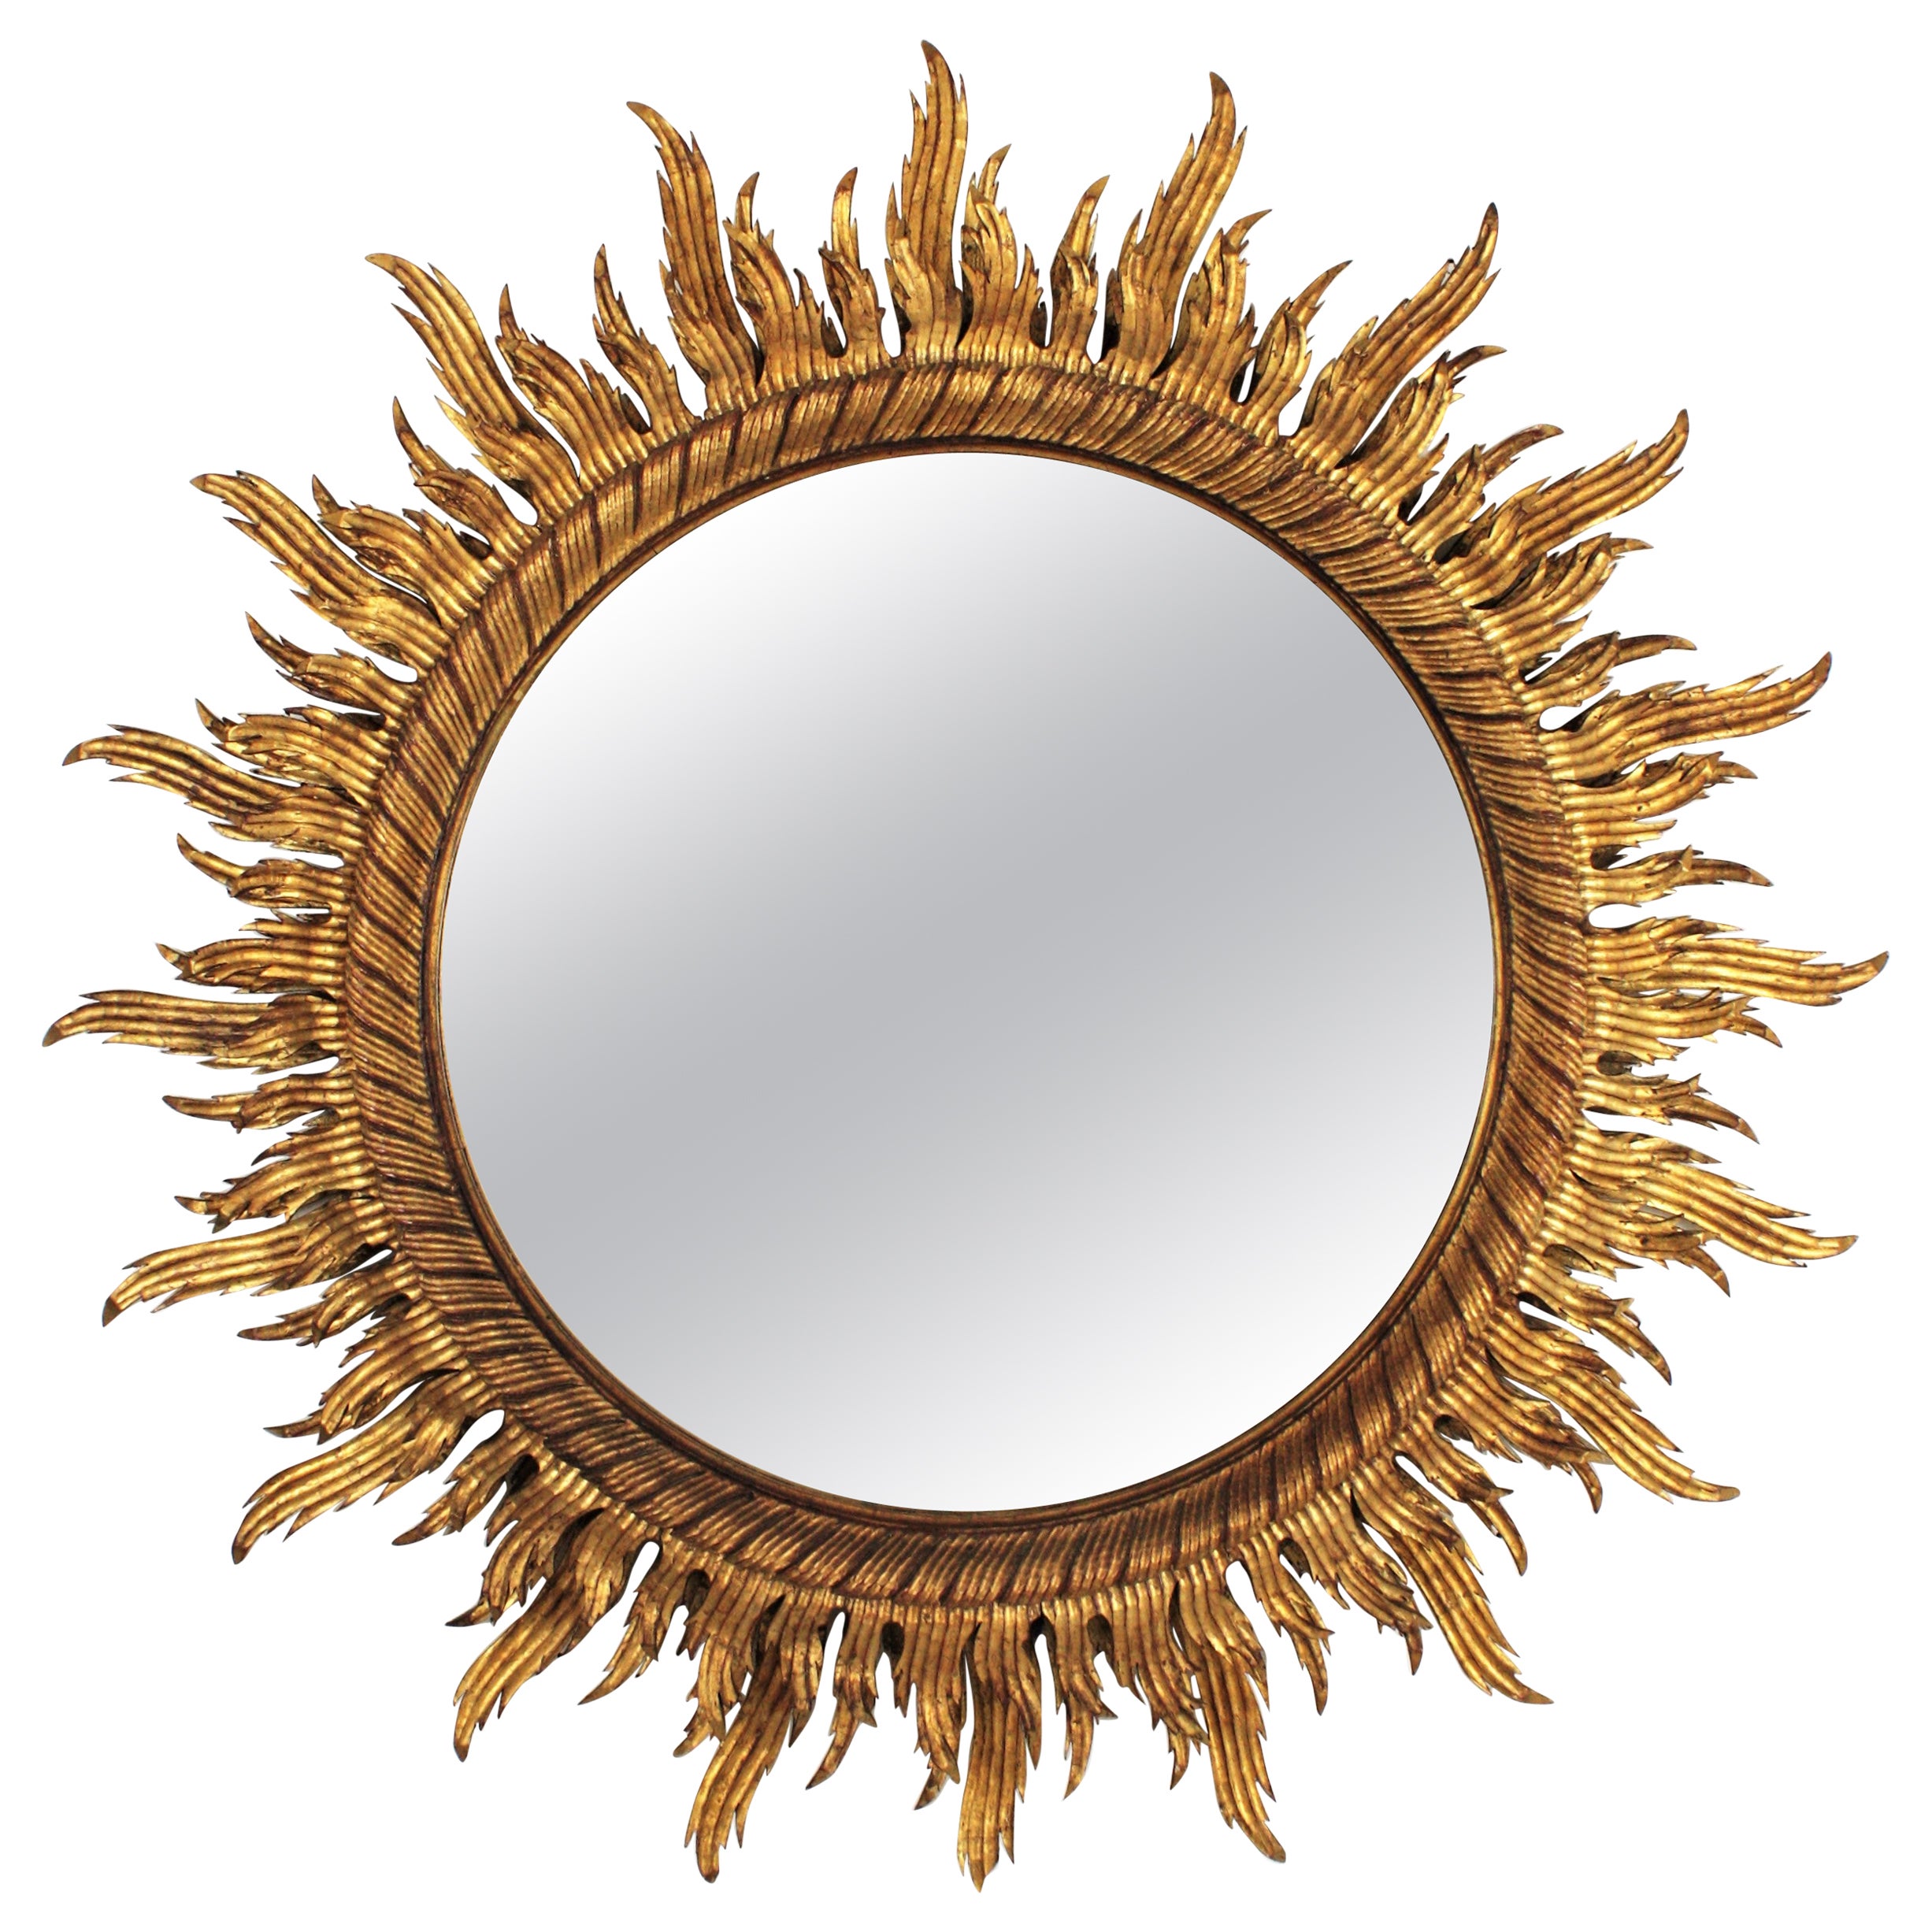 Oversized Gilt Sunburst Mirror in Carved Wood, 52 inches